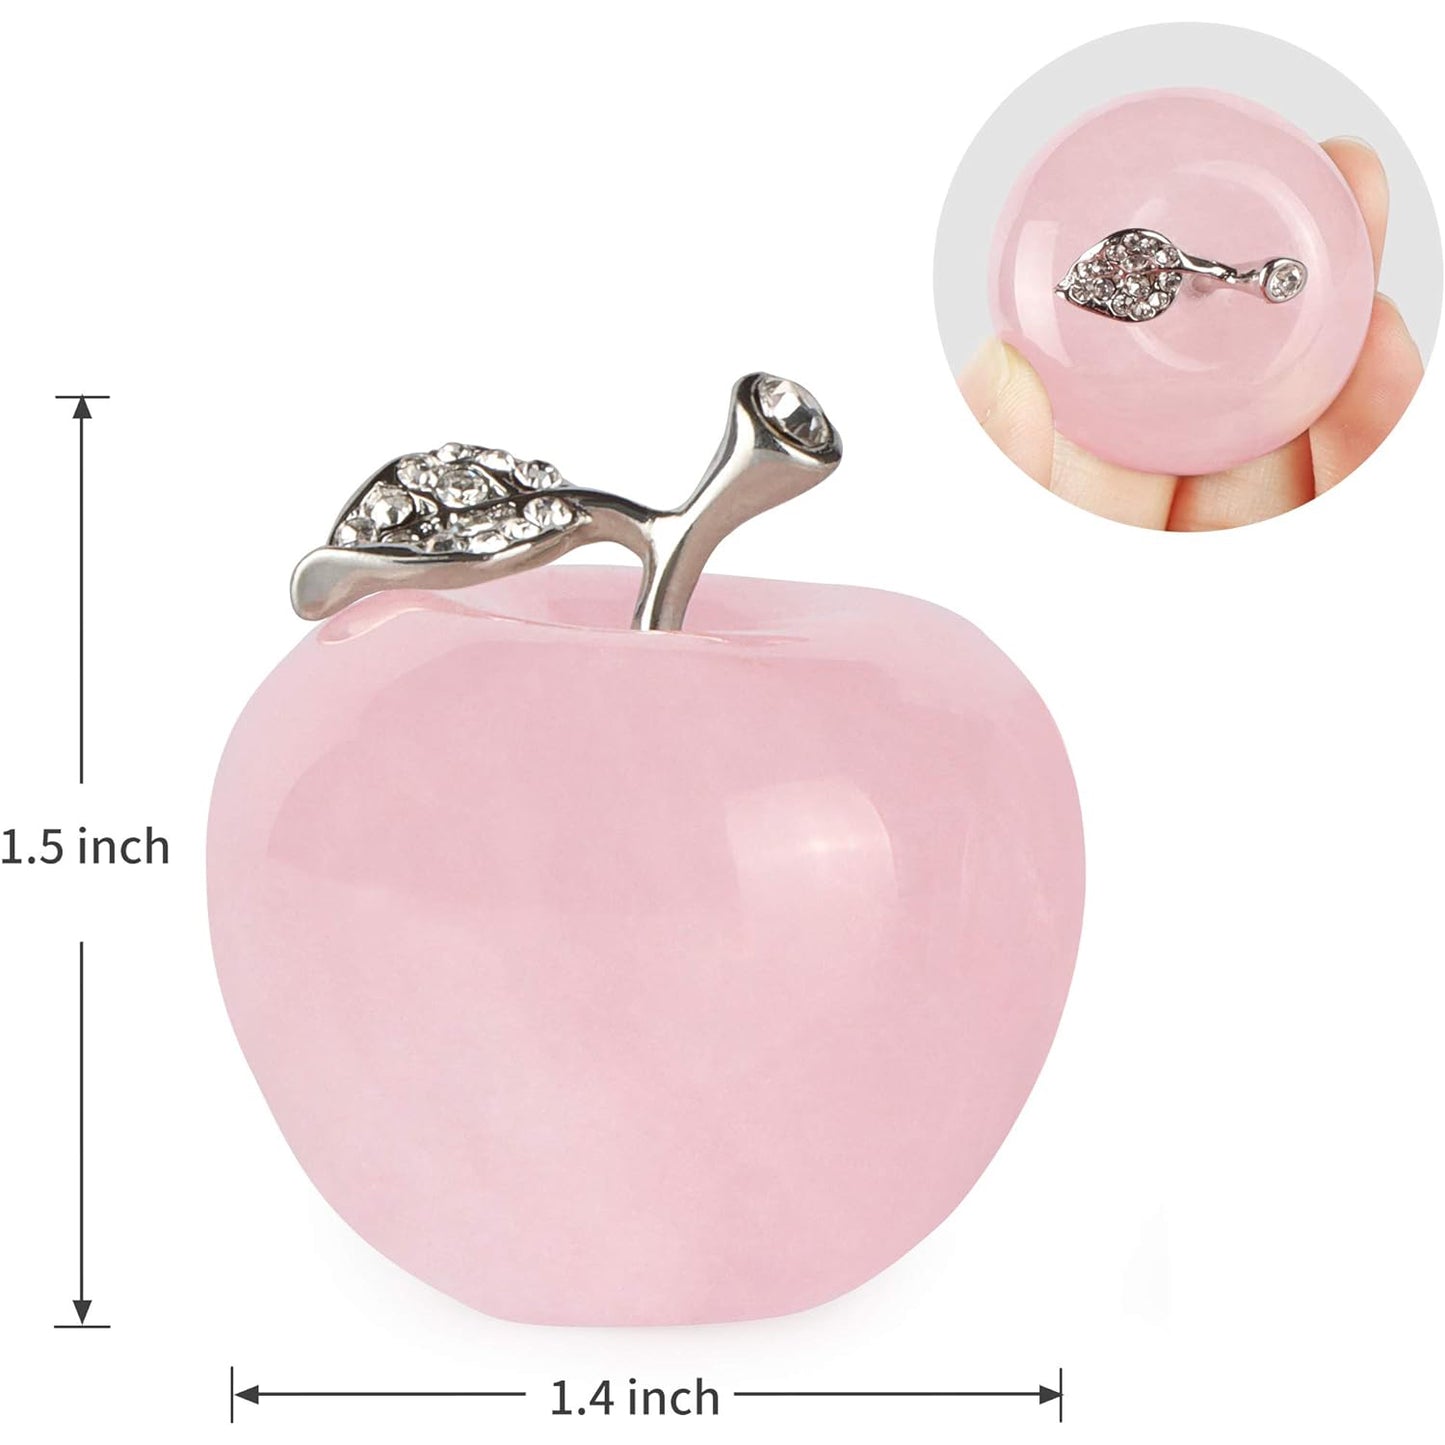 1.5" Rose Quartz Apple Healing Stone for Home Office Decor Gifts